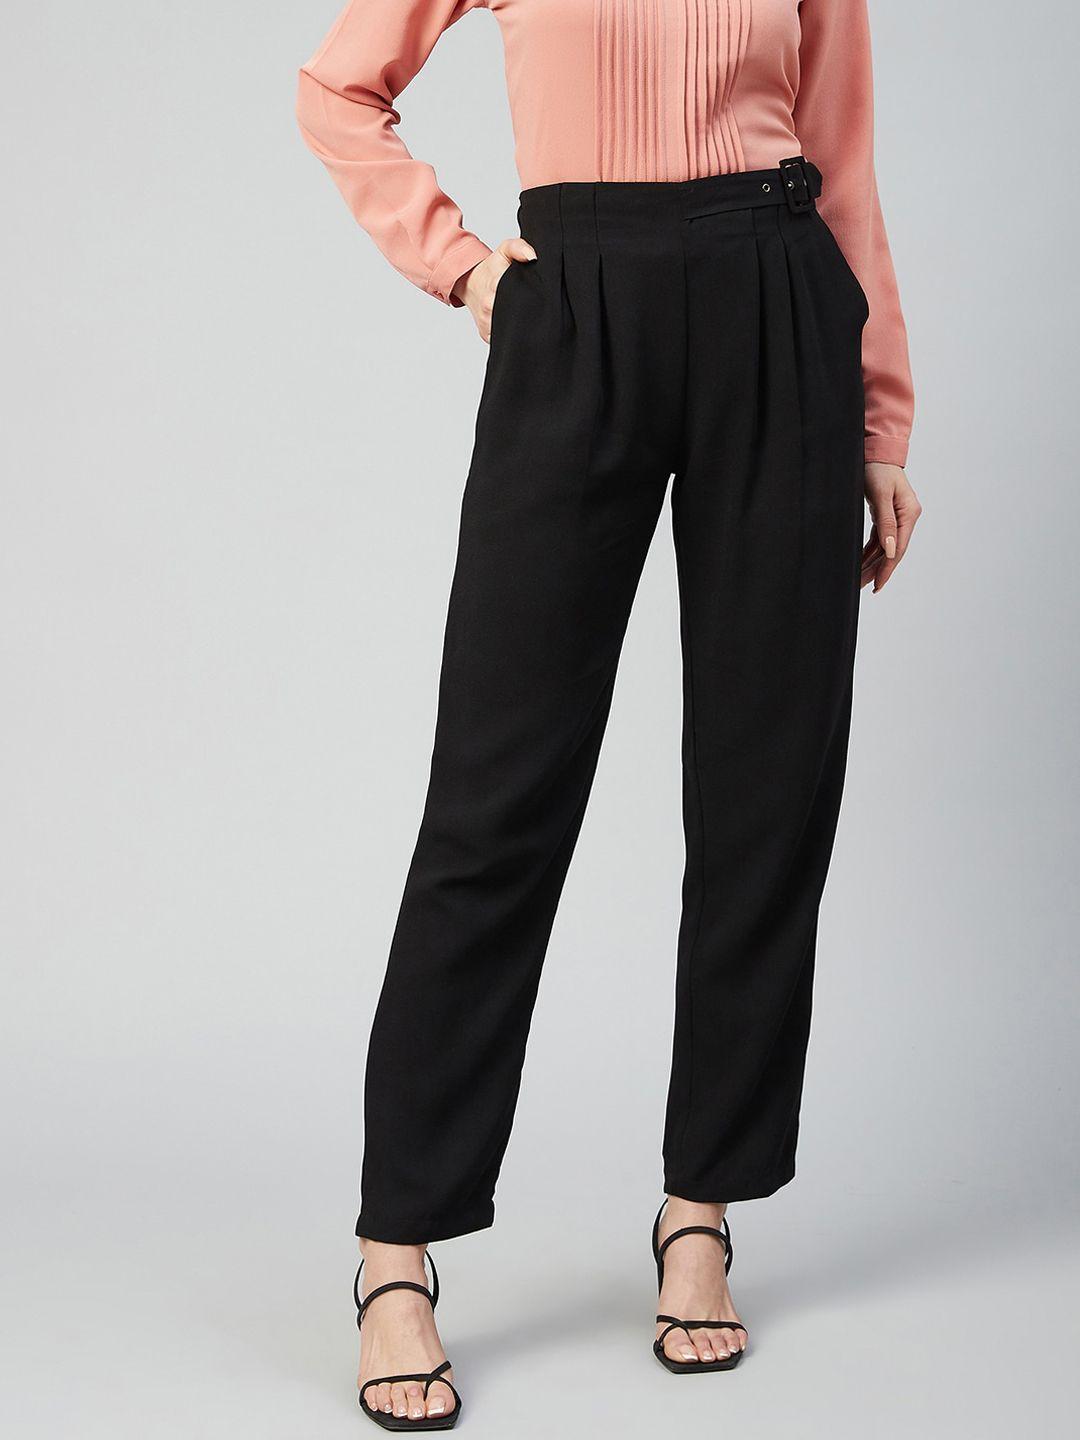 Marie Claire Women Black Solid Pleated Trousers with Belt Buckle Applique